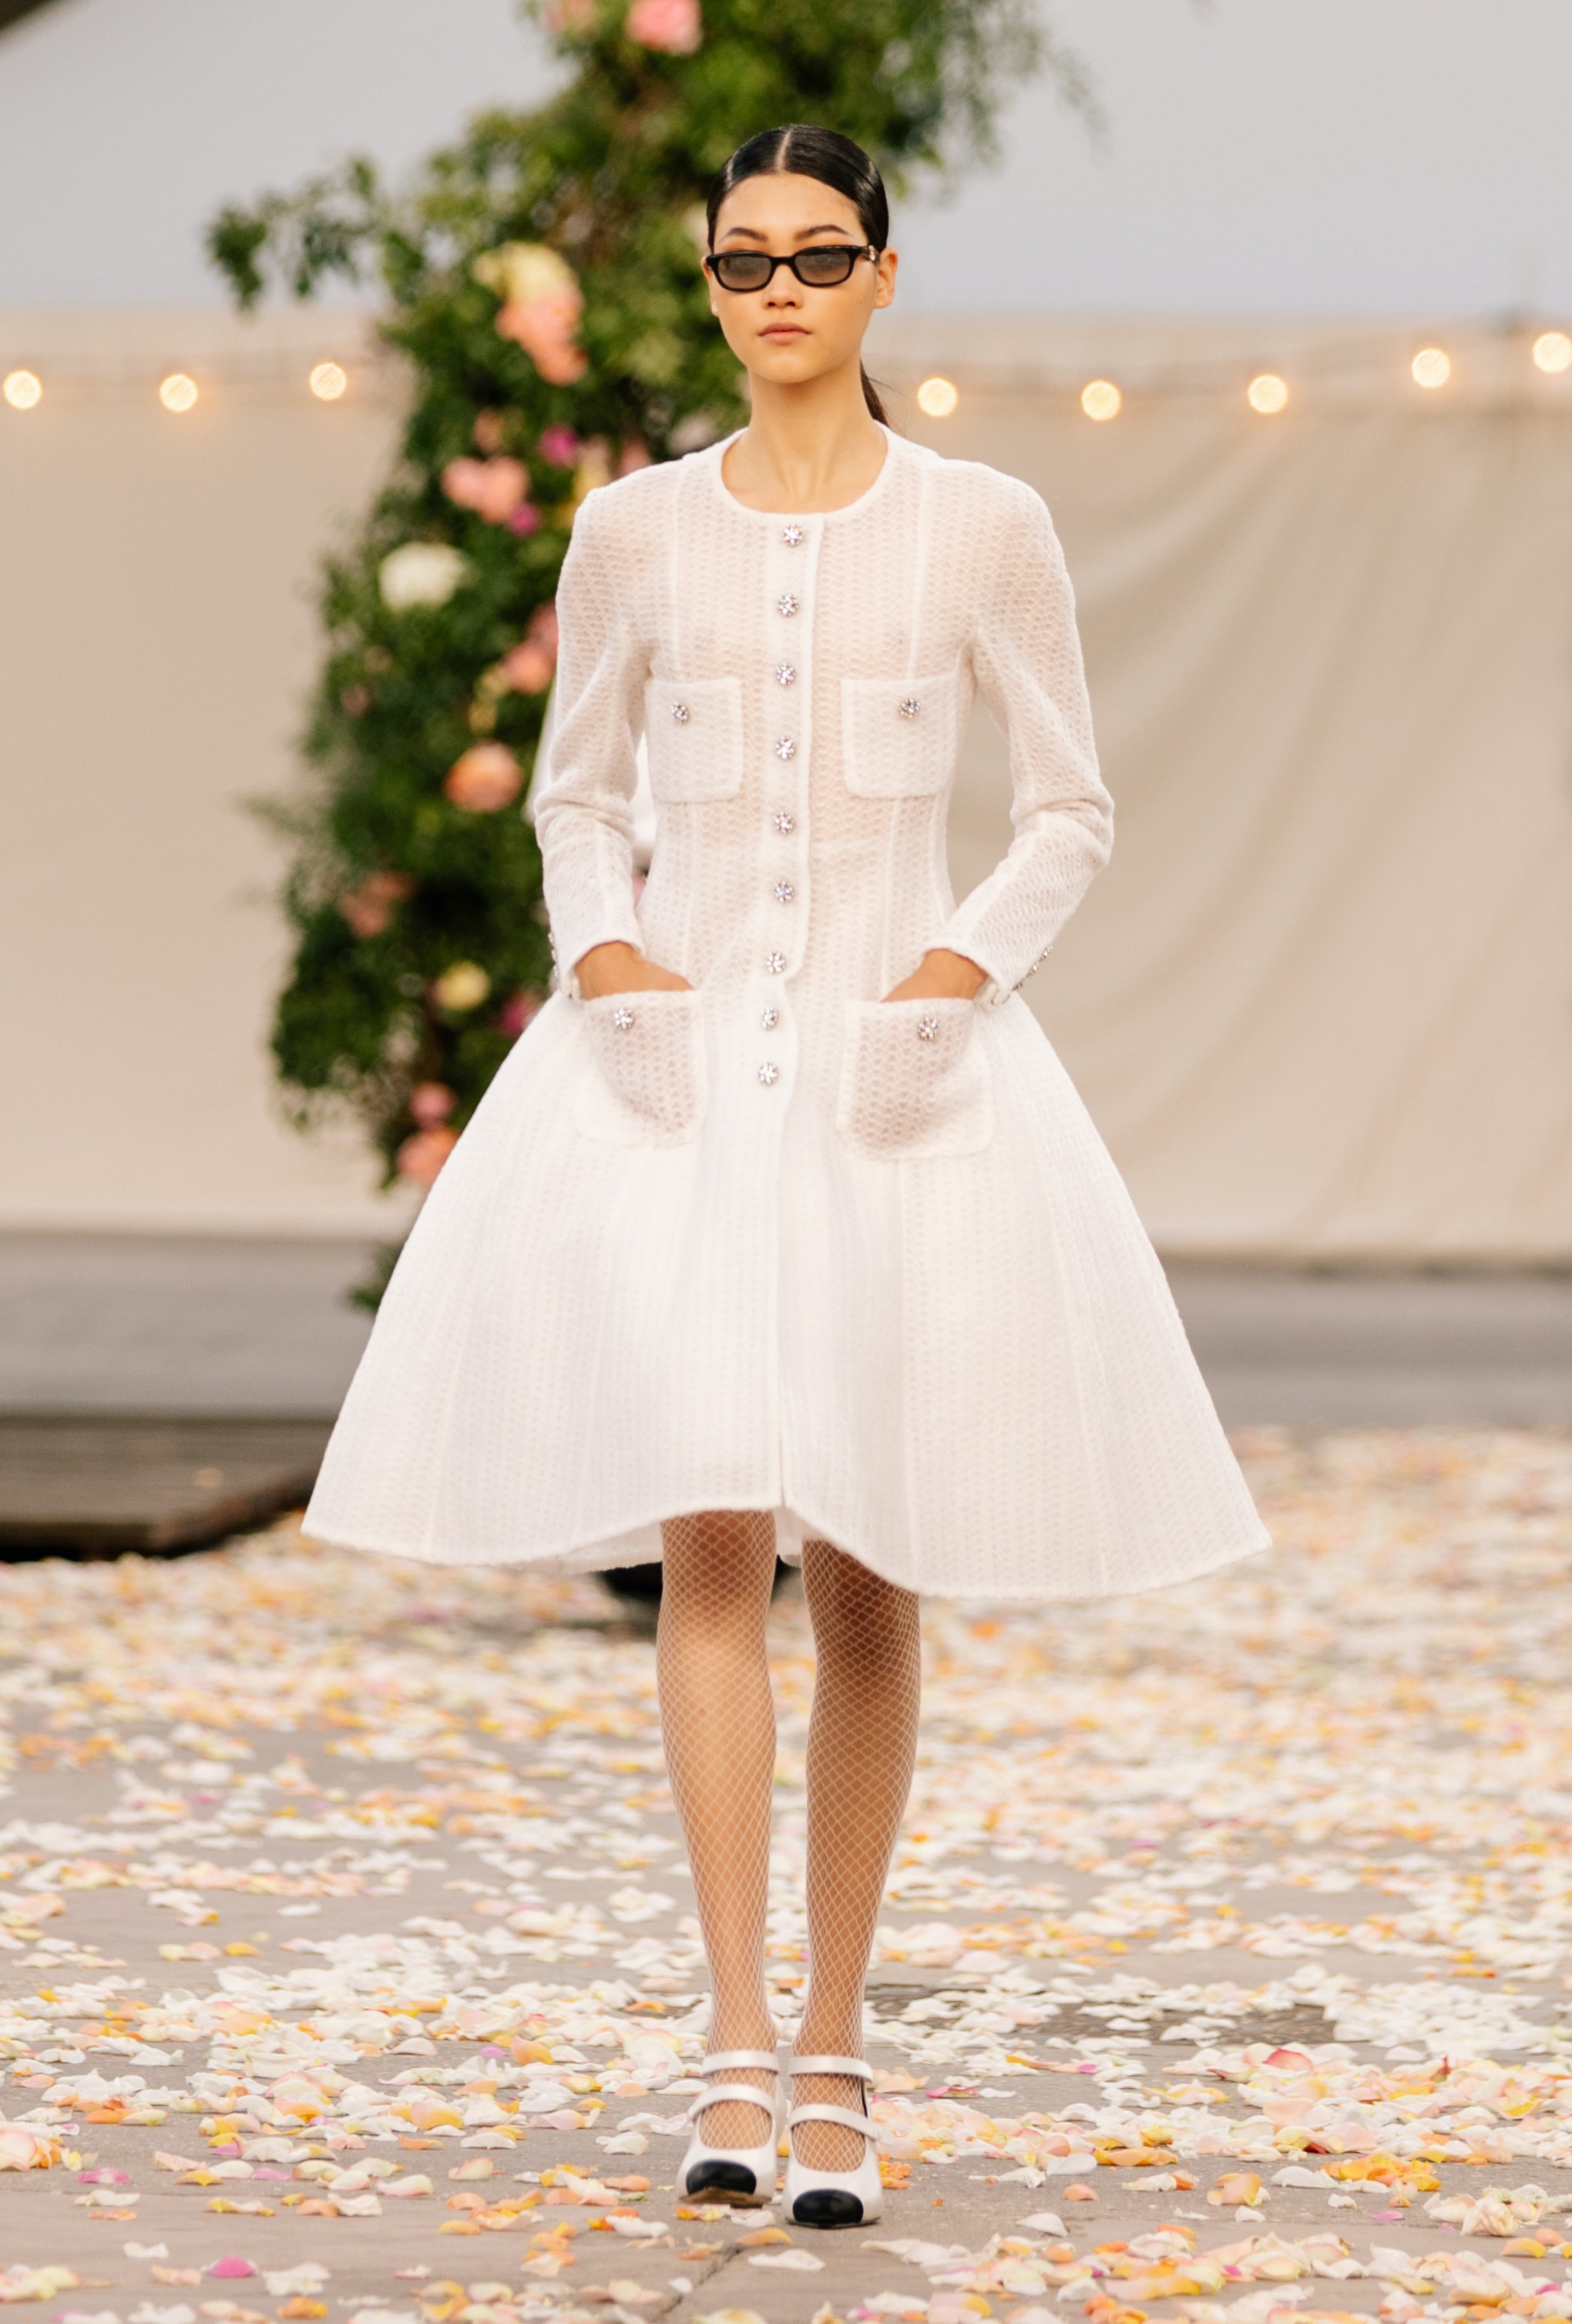 Chanel SS2021 haute couture collection Virginie Viard